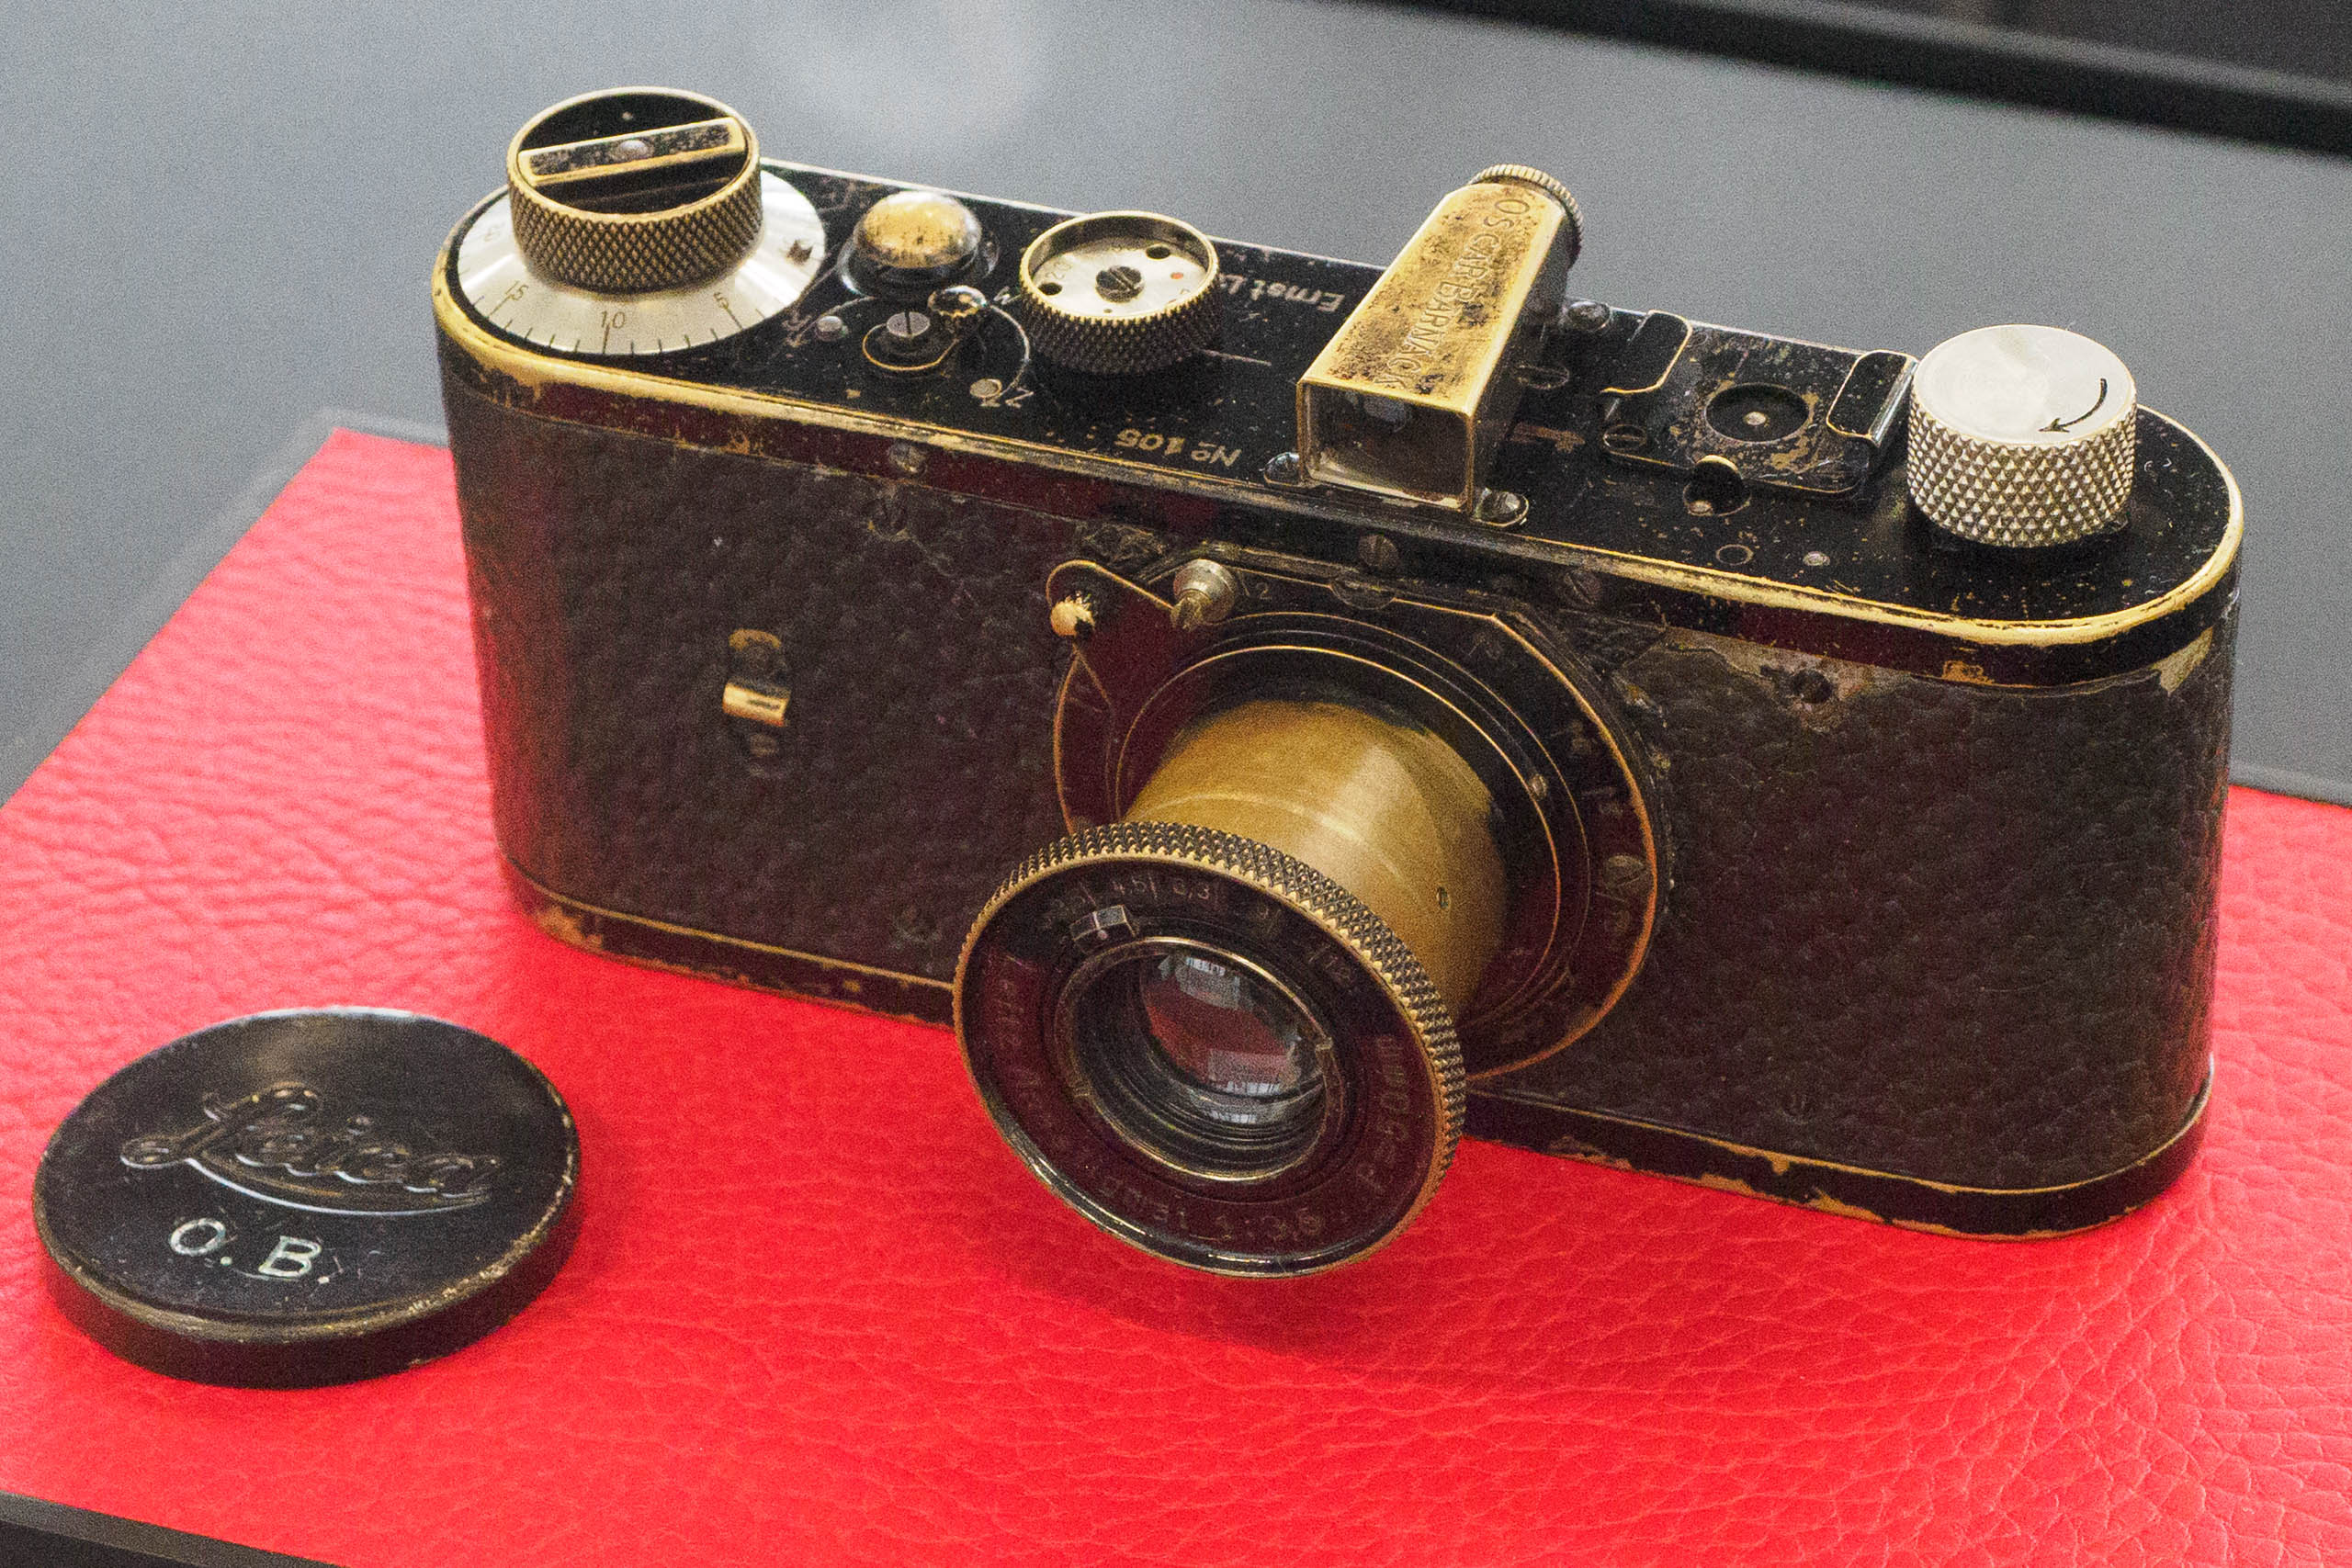 Leica 'O' series no 105 - Oskar Barnack's personal camera, and the most expensive camera ever sold at auction